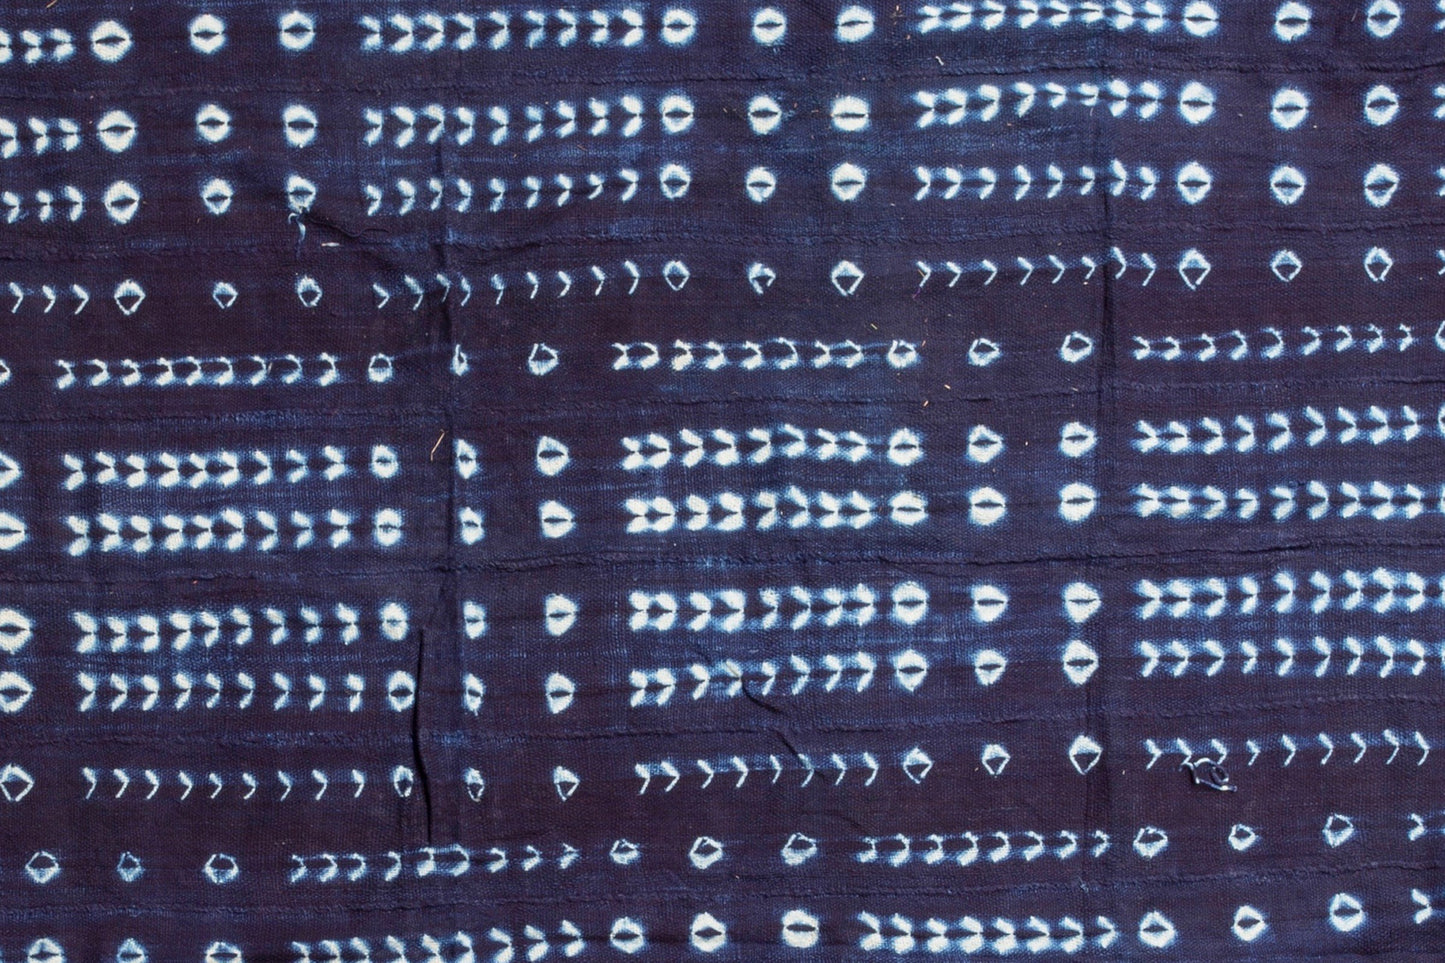 Handwoven cotton fabric from Africa FAB 2